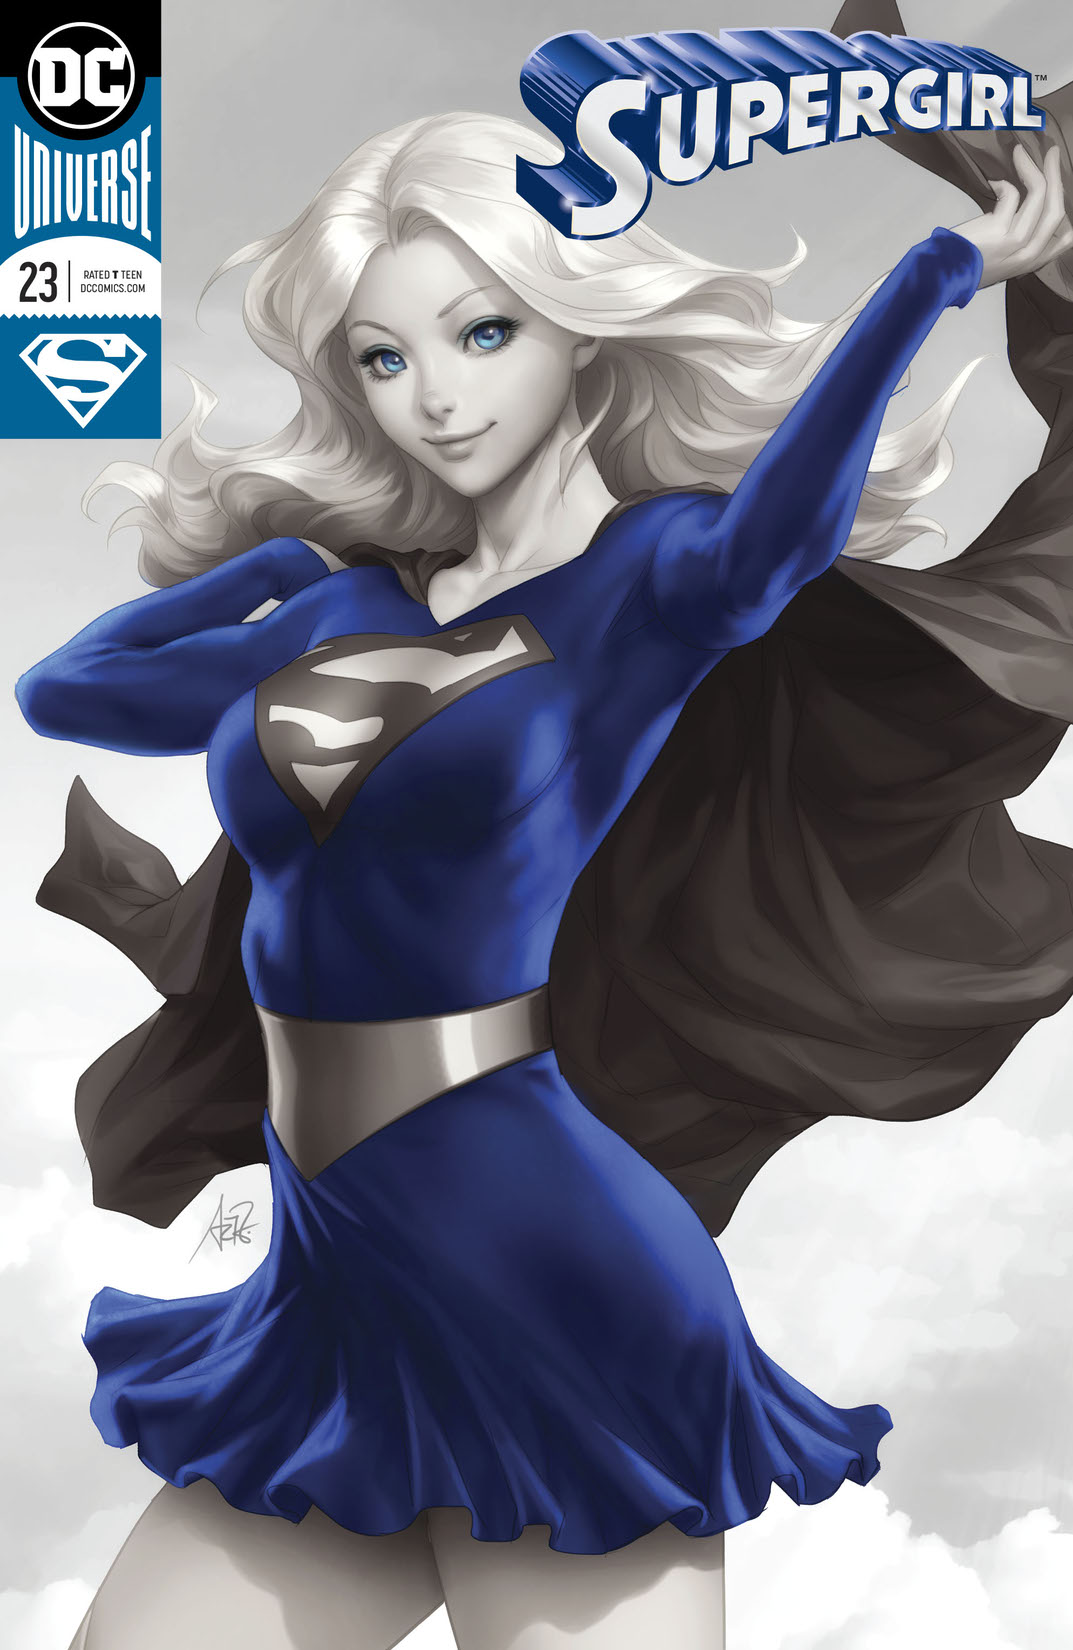 Supergirl (2016-) #23 preview images